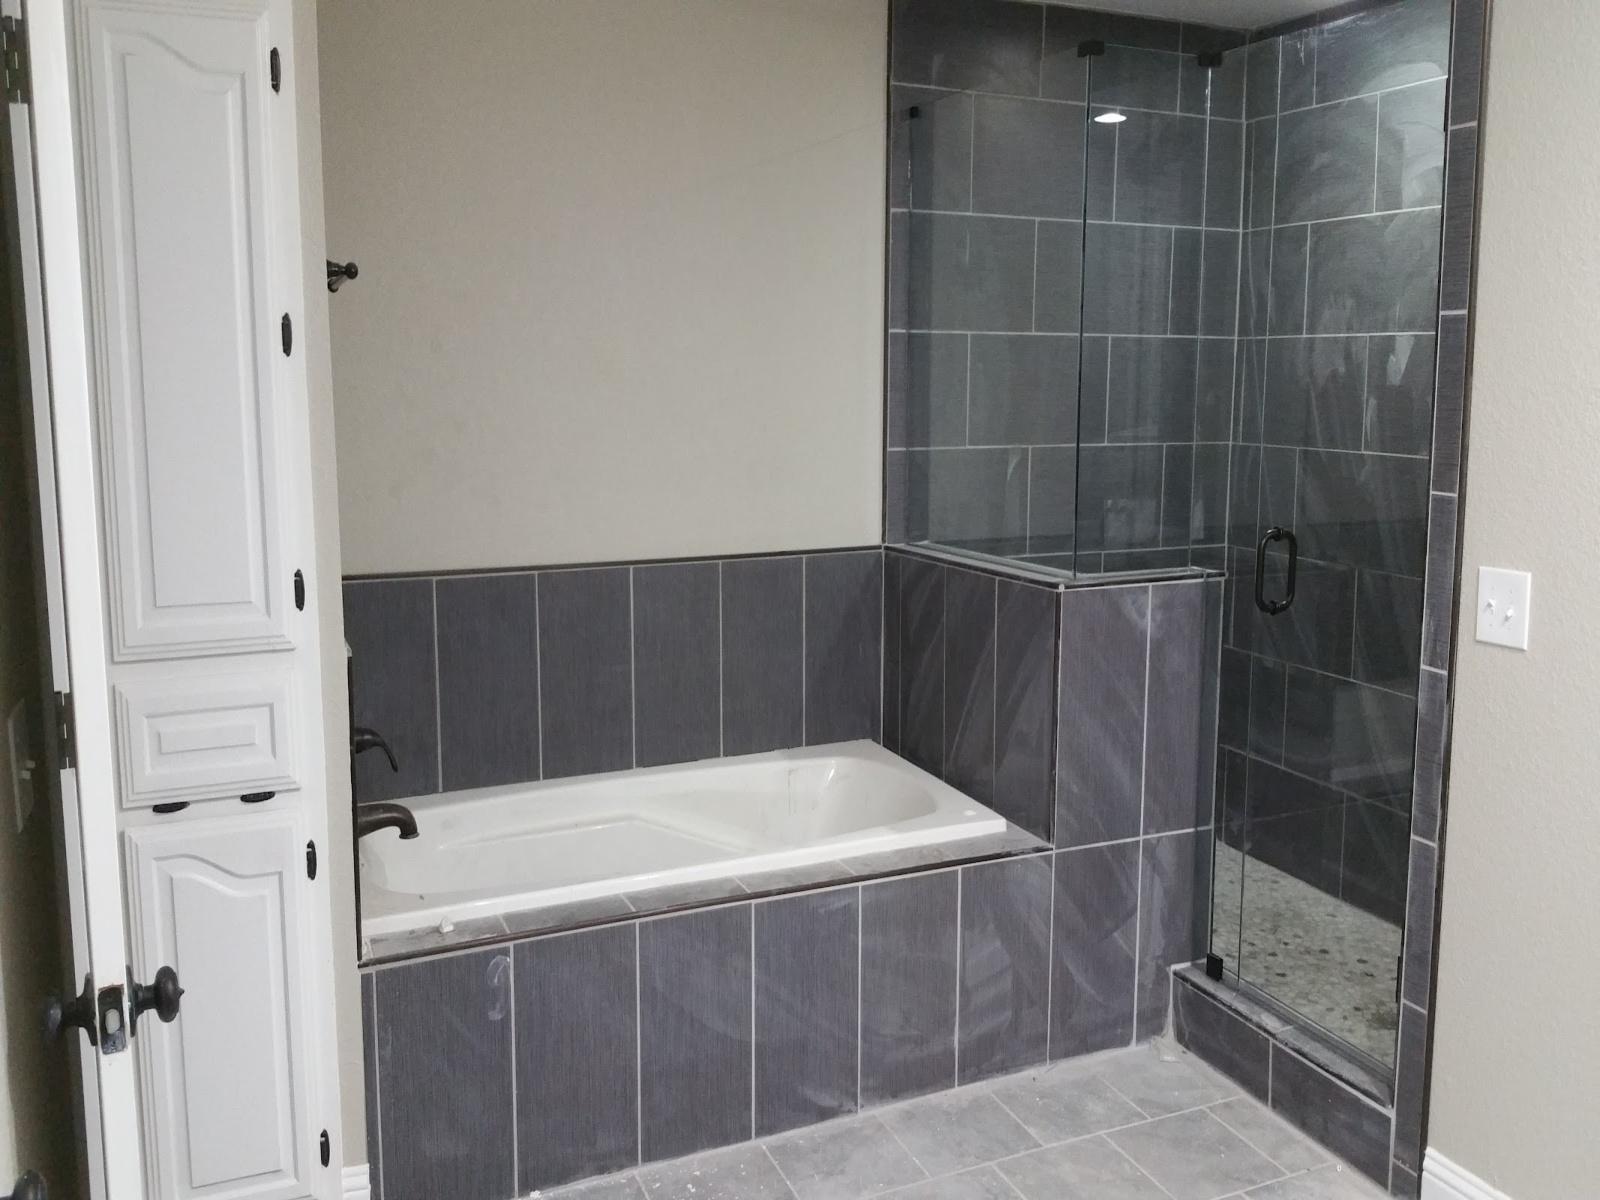 How long does a bathroom remodeling typically take from start to finish?